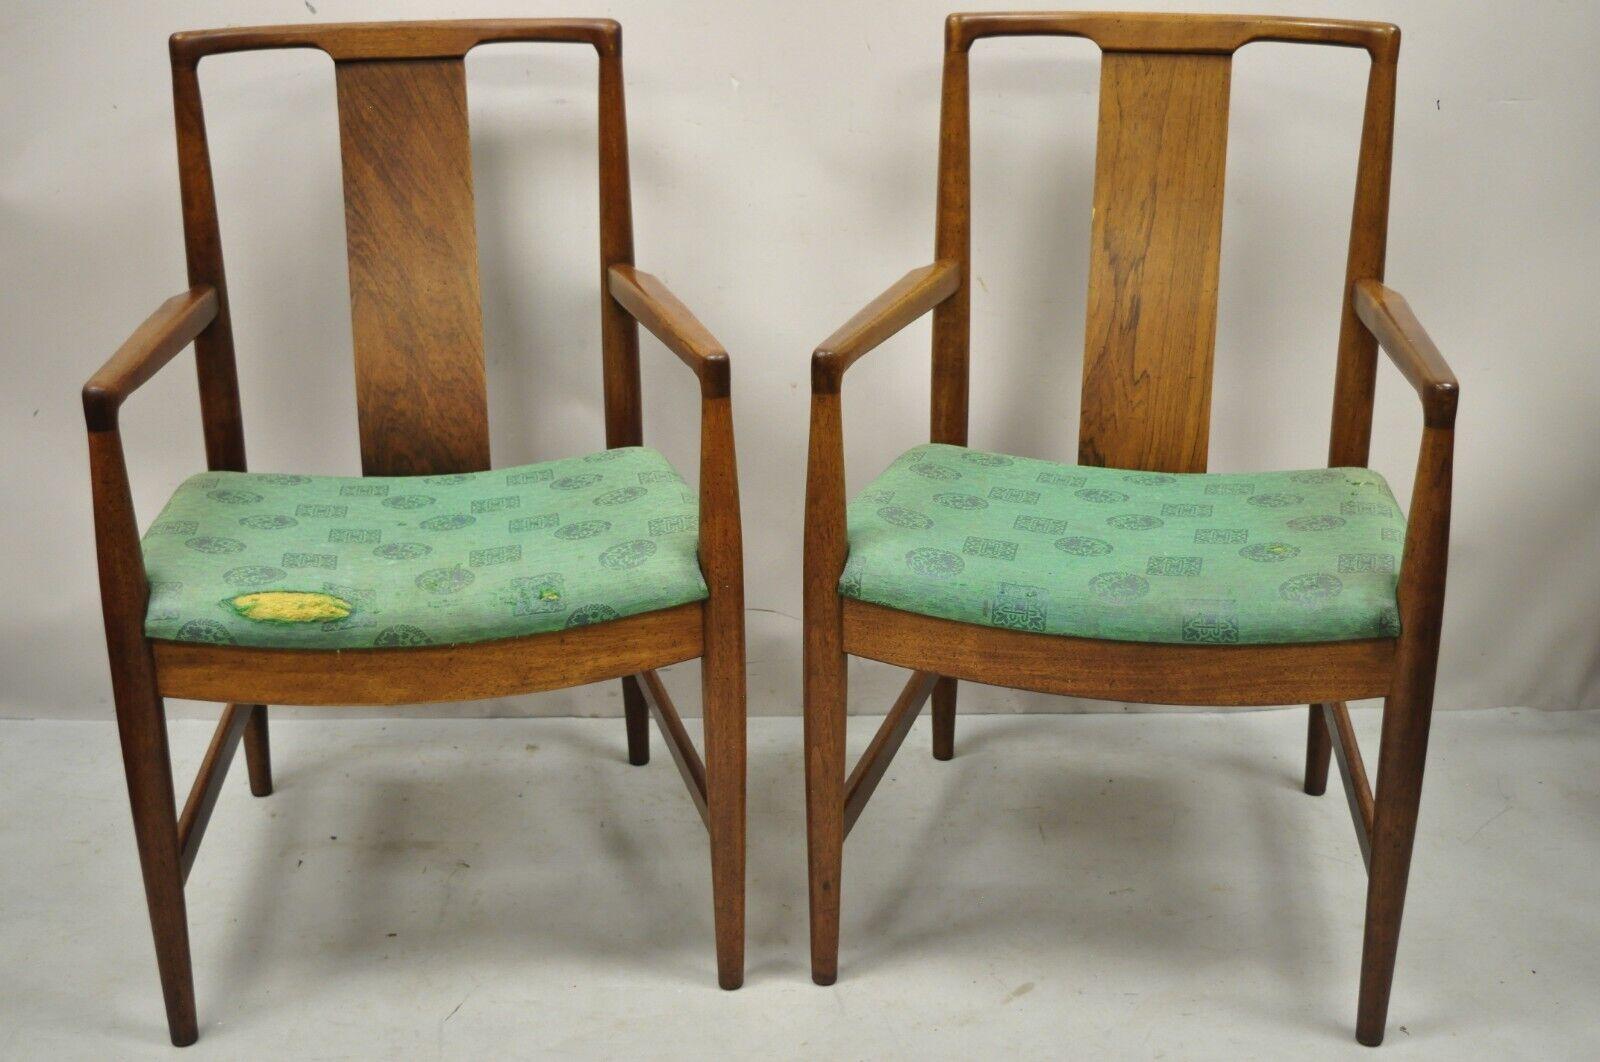 Mid-Century Modern walnut curved angled back dining arm chairs - a pair. Item features sleek curved back rails, angled backrests, beautiful woodgrain, tapered legs, very nice vintage pair. Circa Mid 20th Century. Measurements: 35